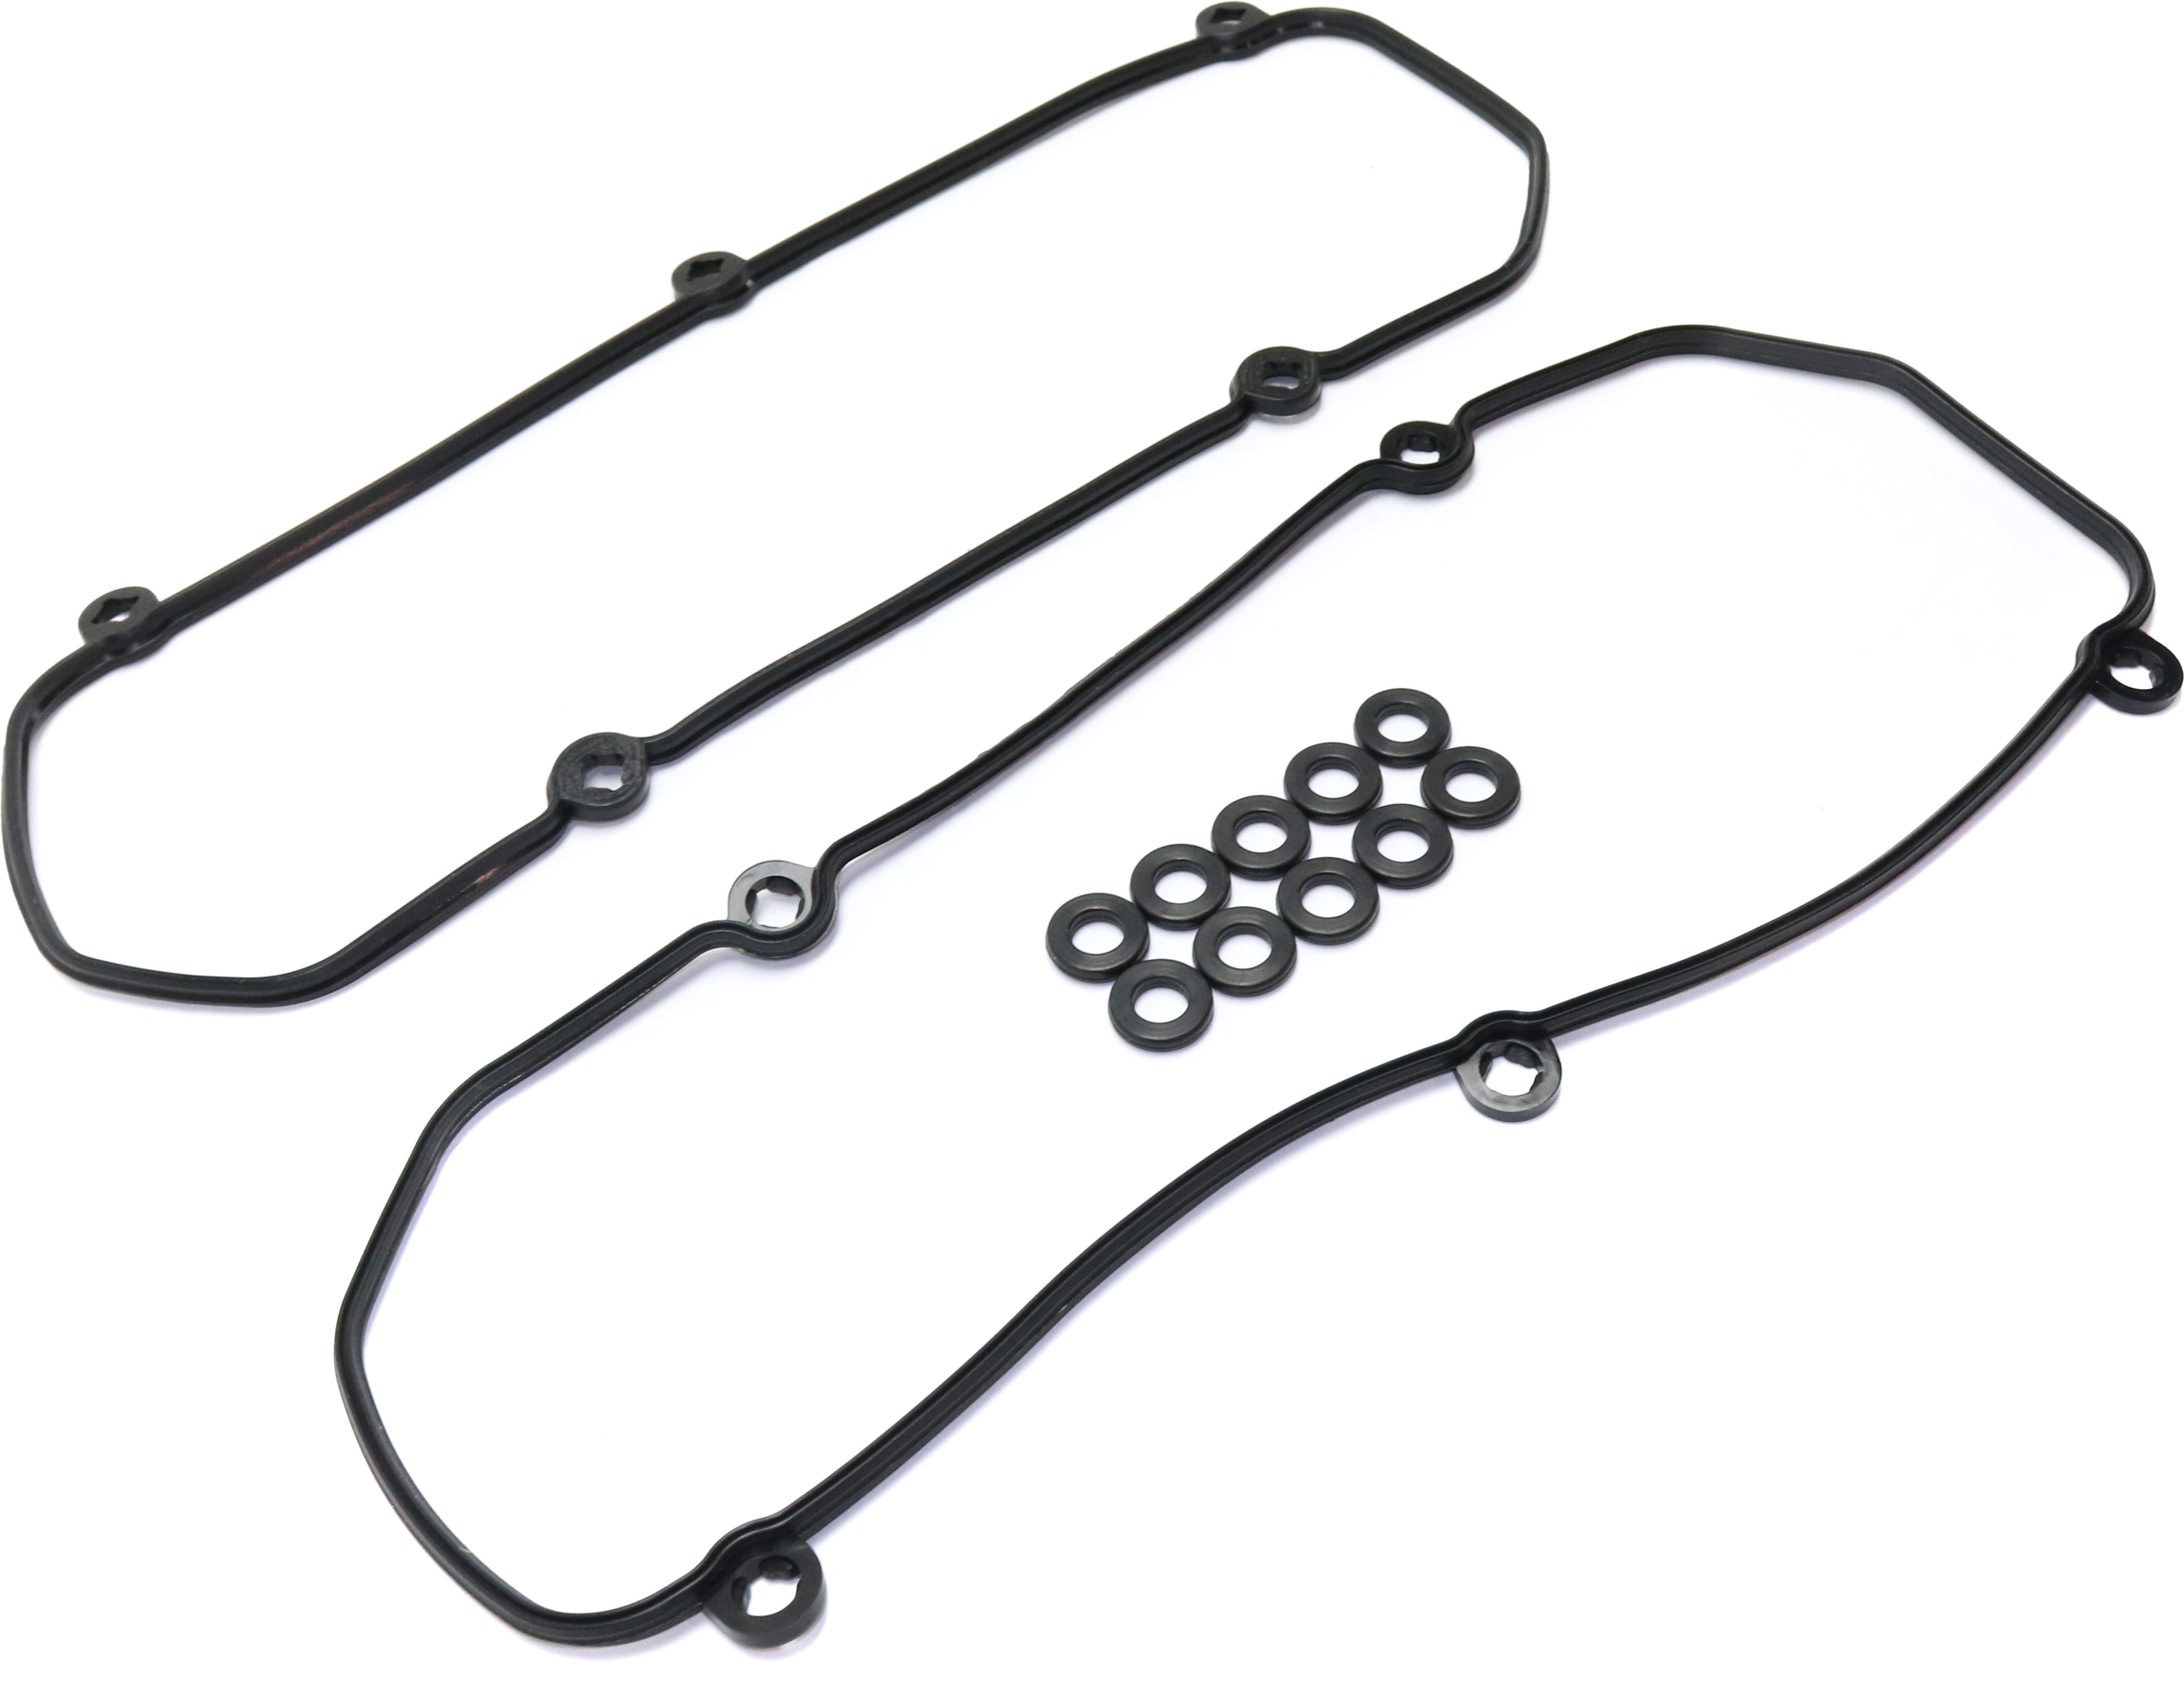 Valve Cover Gasket Compatible with 2004 Ford F-150 Heritage 1994-1995  Mercury Sable 6Cyl 4.2L 3.8L